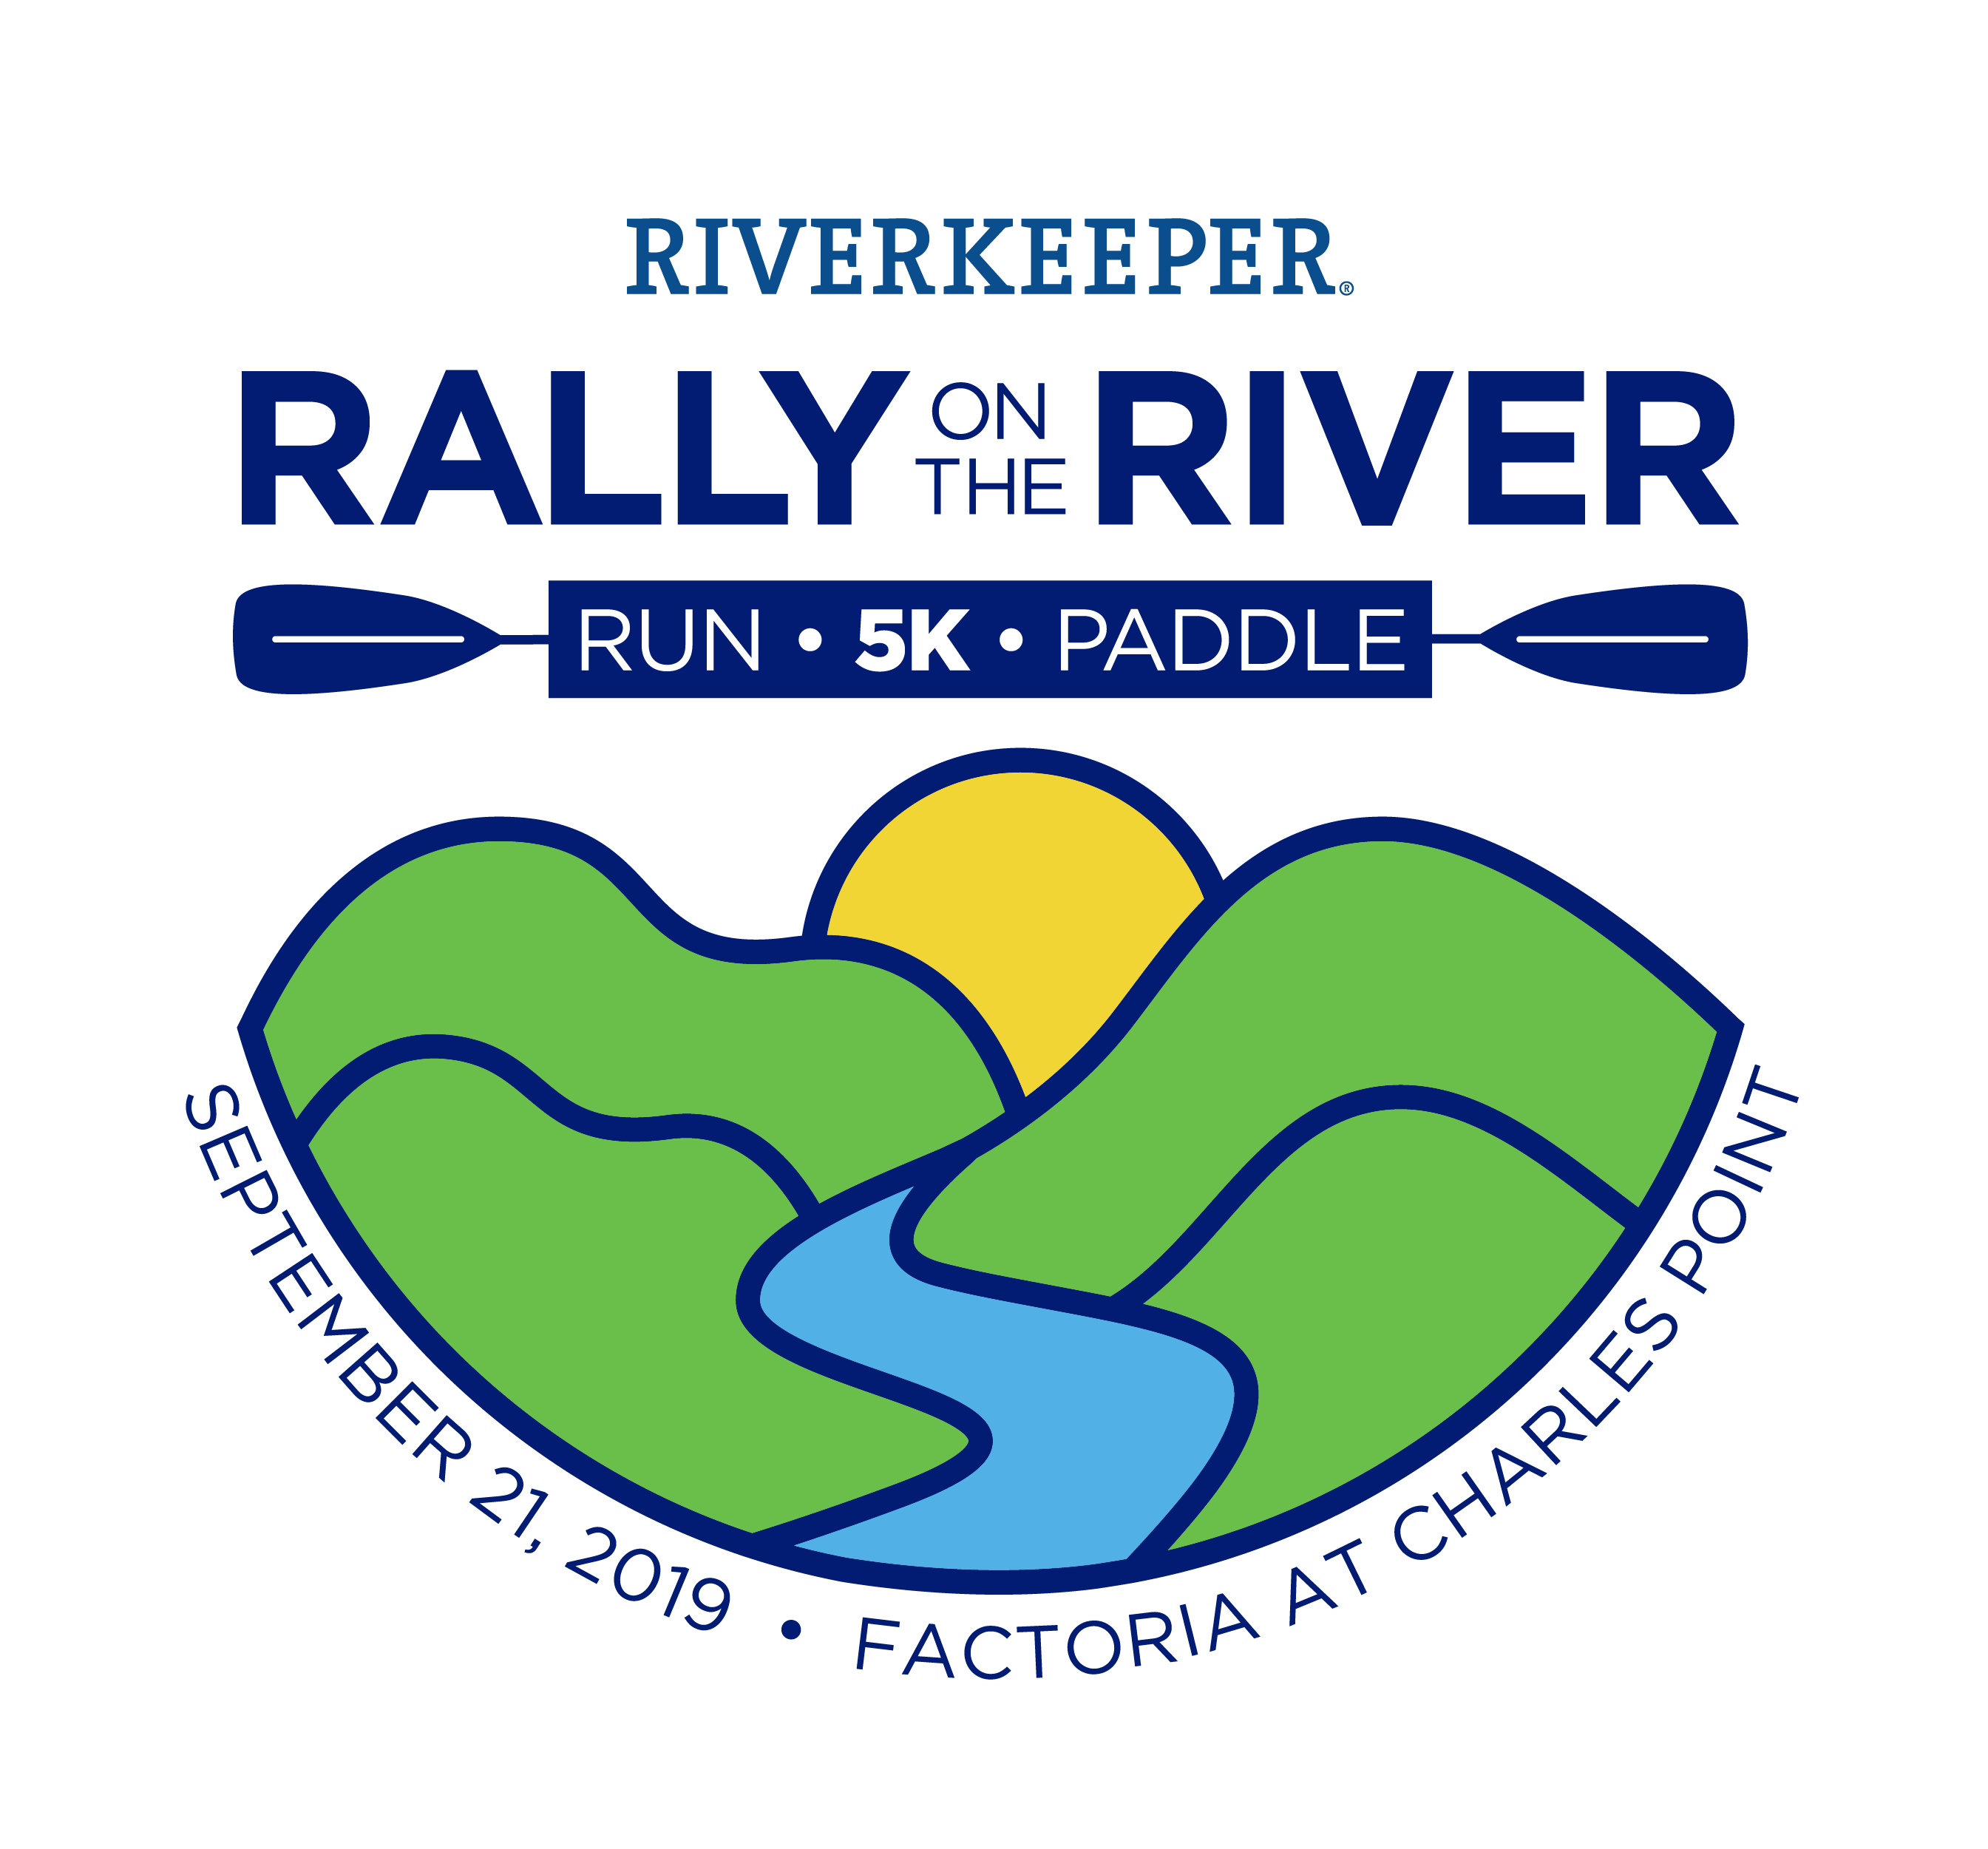 Rally on the River Campaign